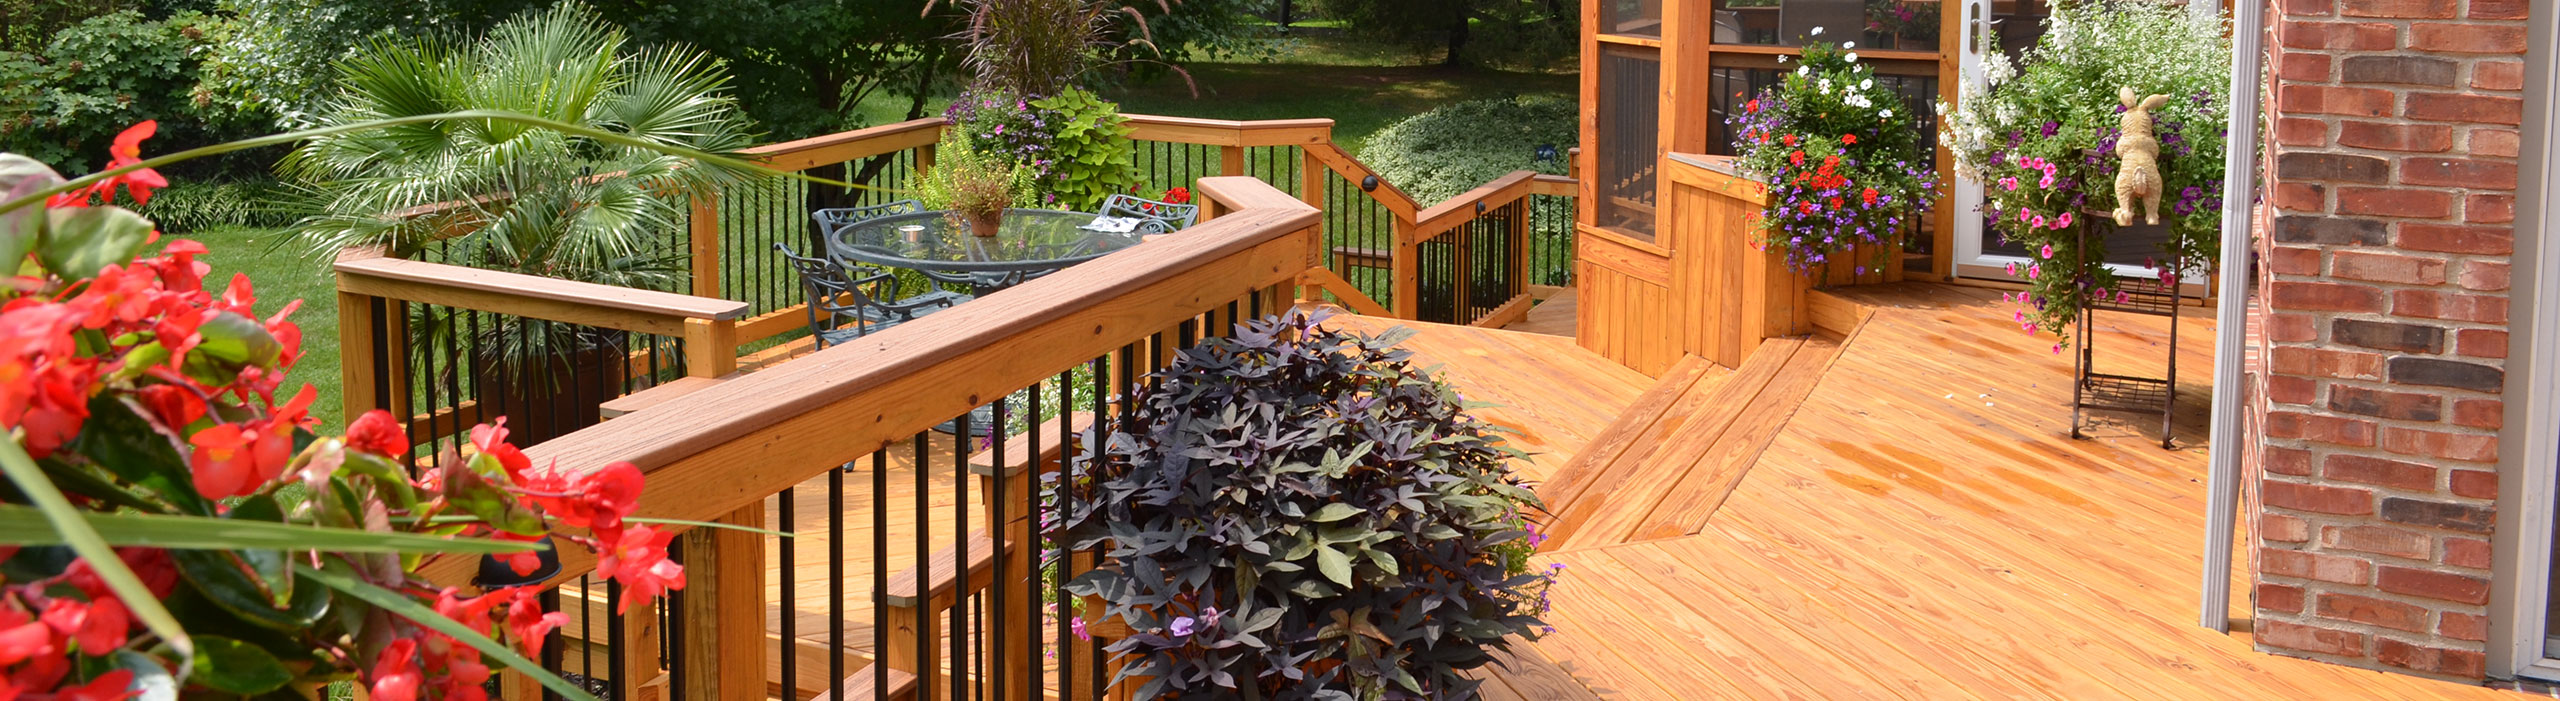 American Deck And Sunroom Planning Your Kentucky Custom Deck By